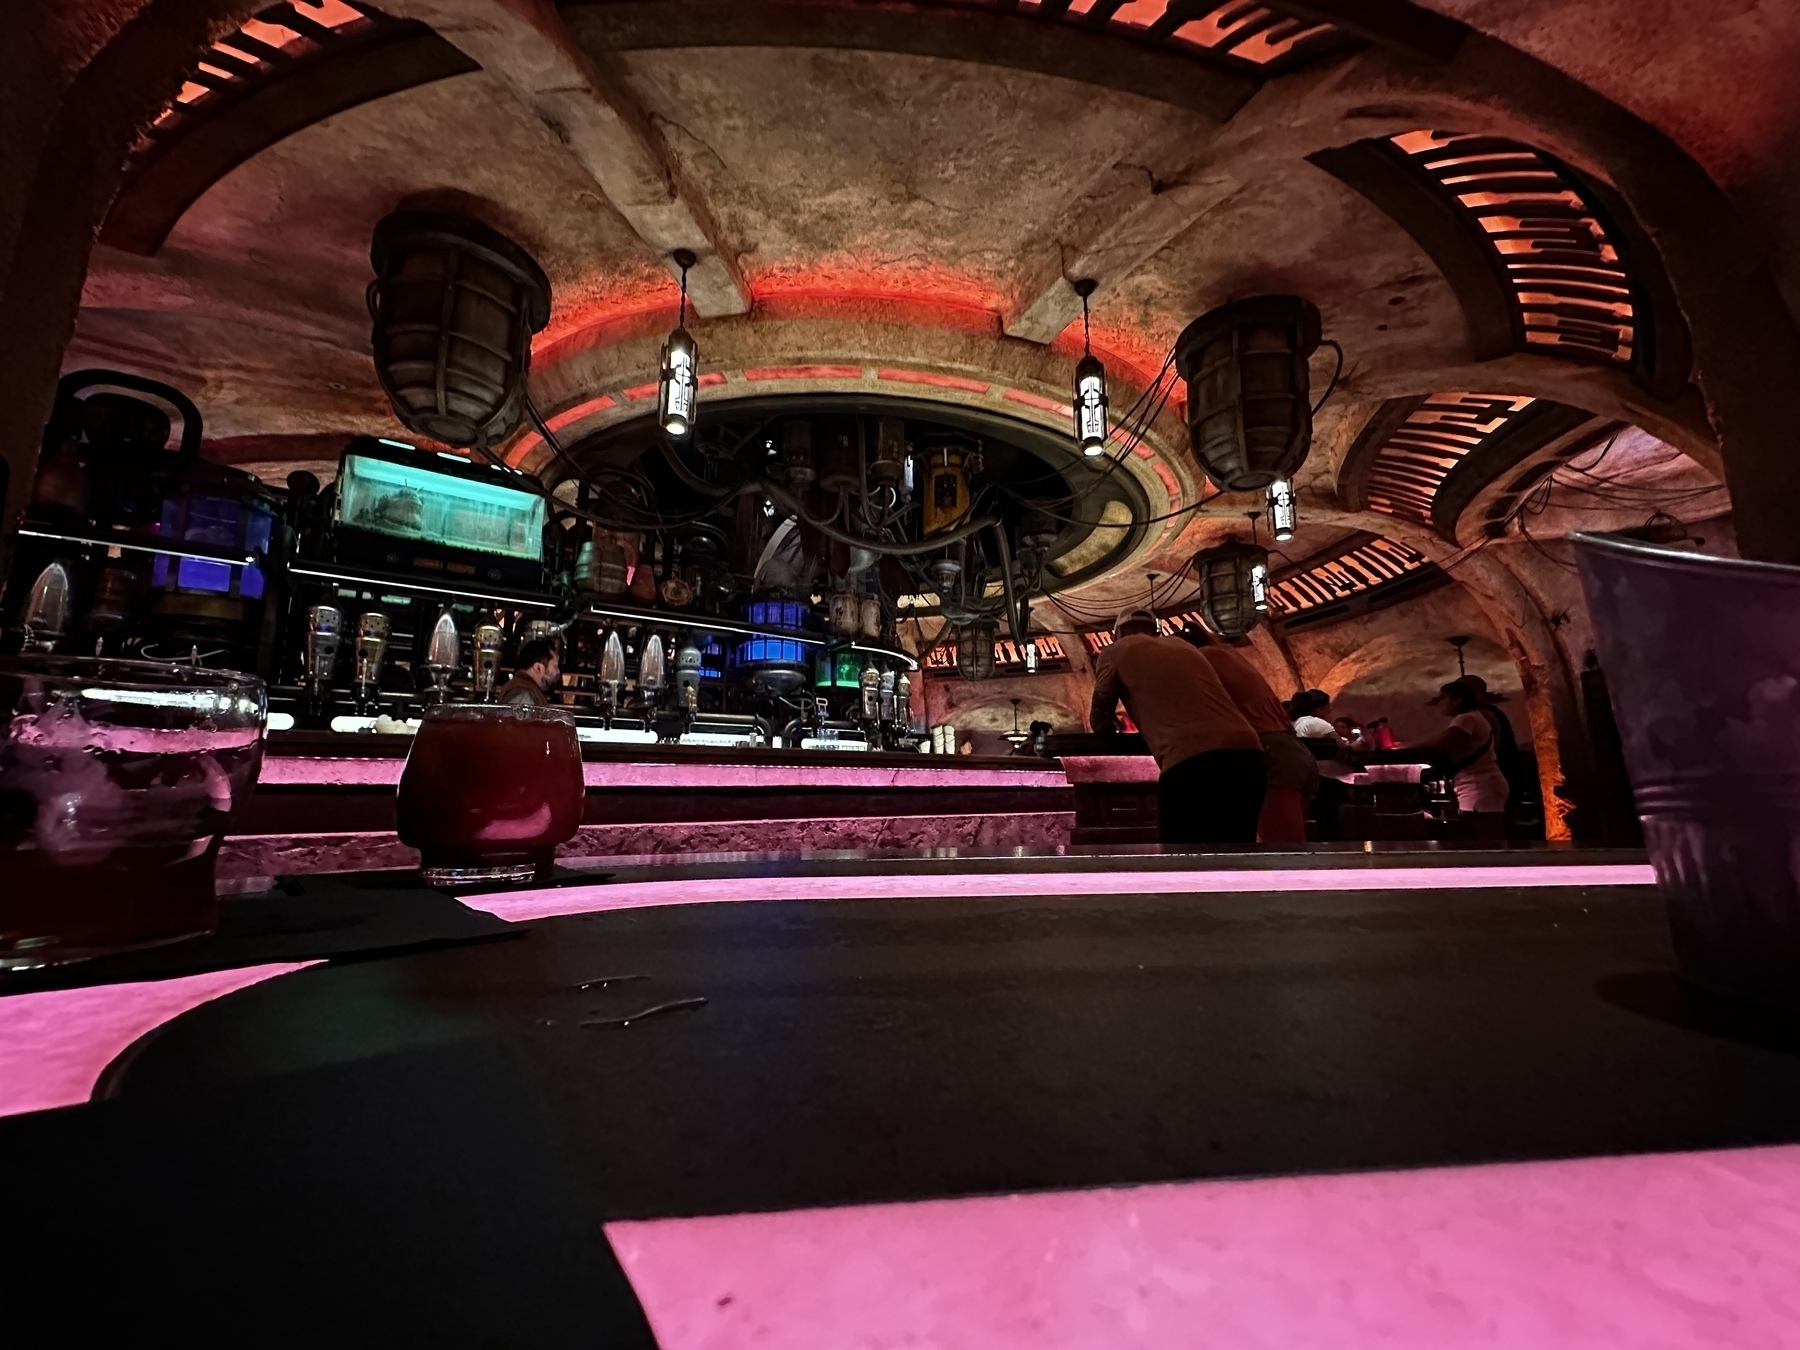 A relatively quiet moment at Oga’s cantina